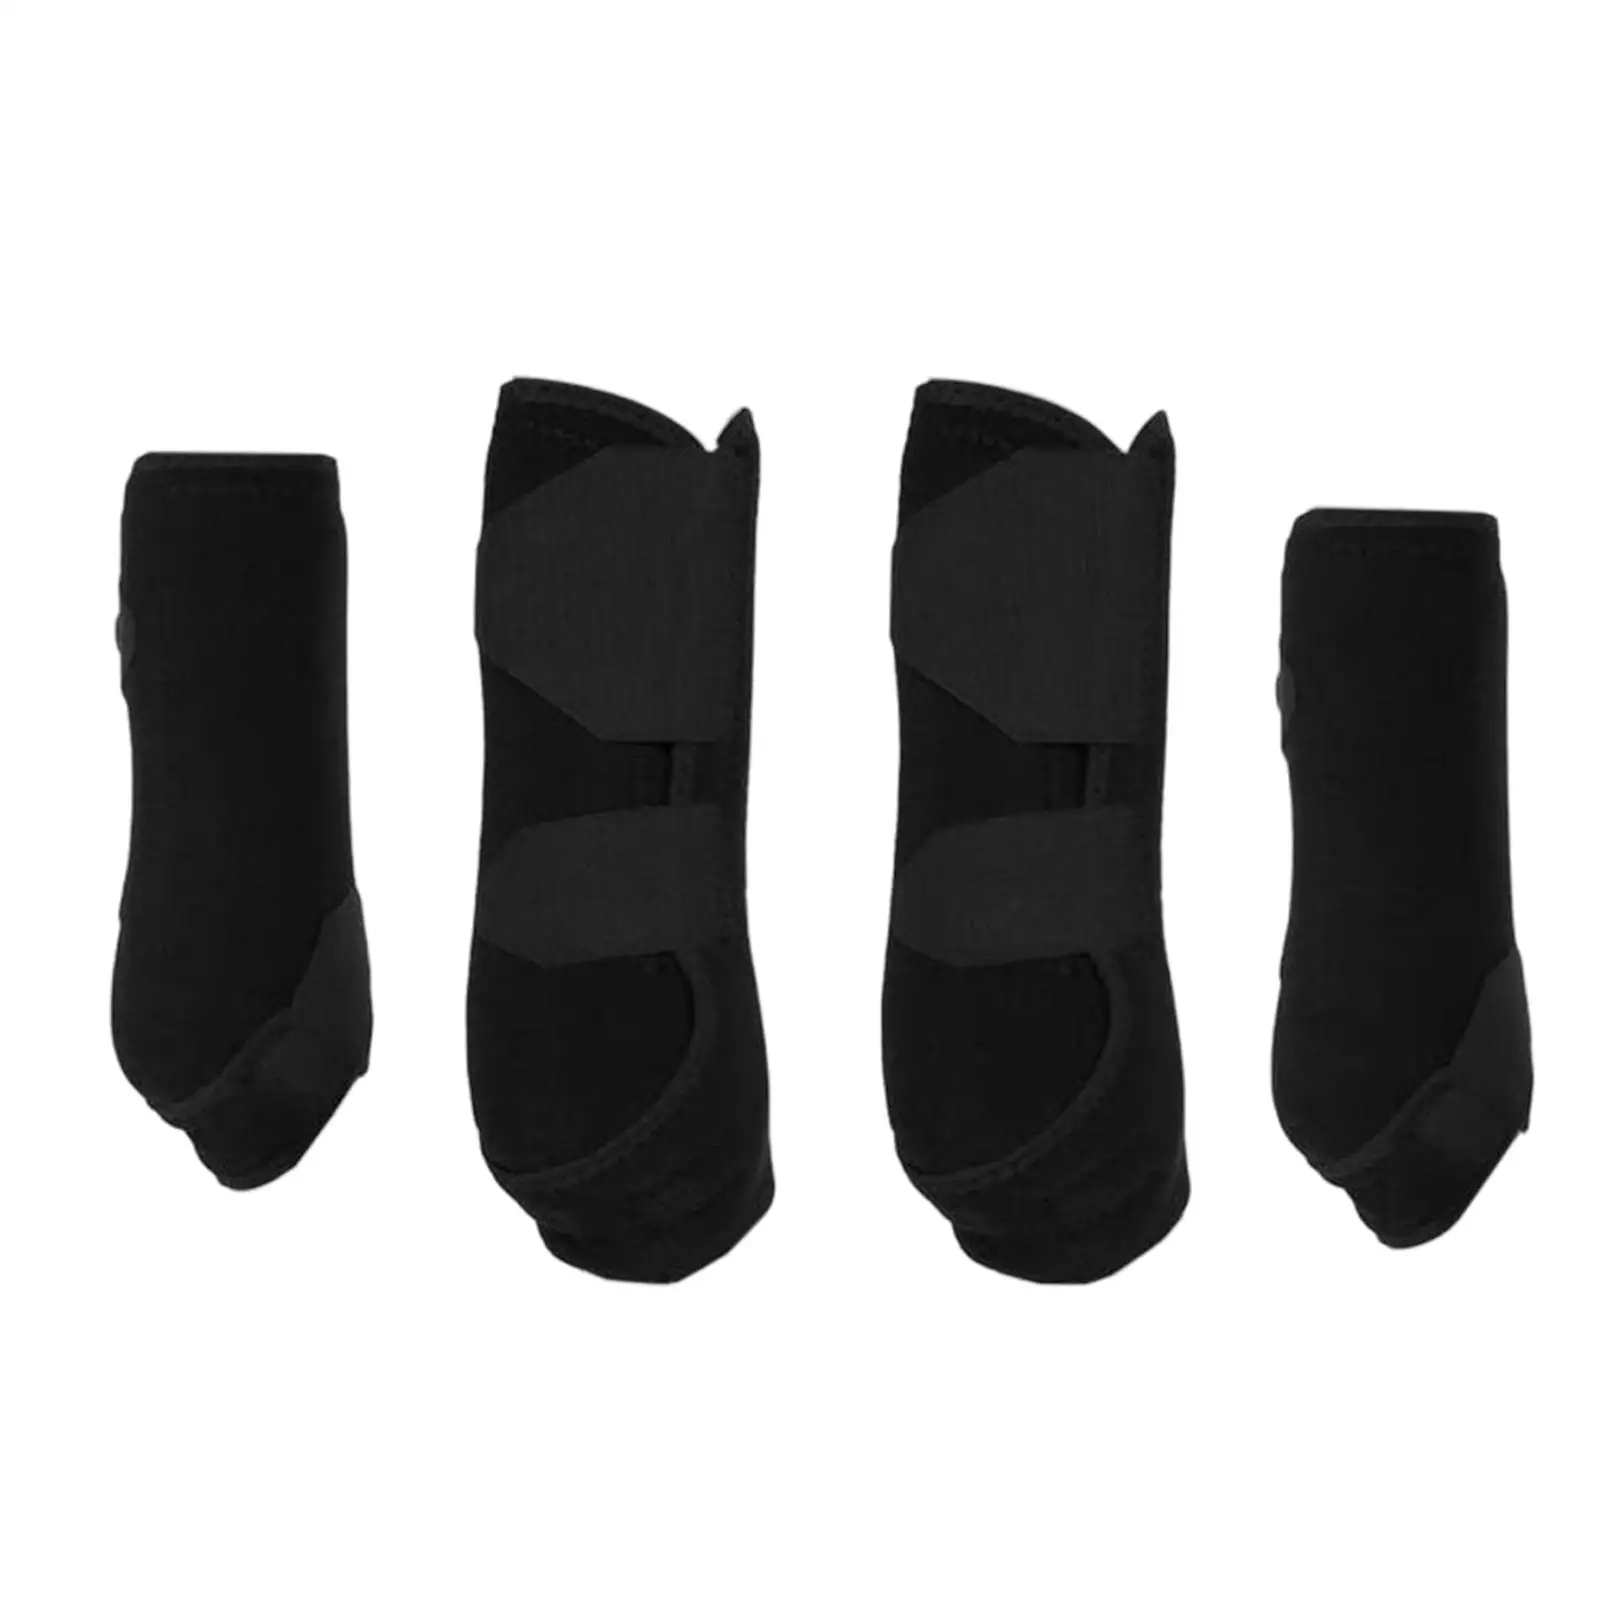 4Pcs Neoprene Horse Boots, Leg Protection Wraps, Shockproof, Leg Guard, for Jumping Training Riding Equestrian Equipment